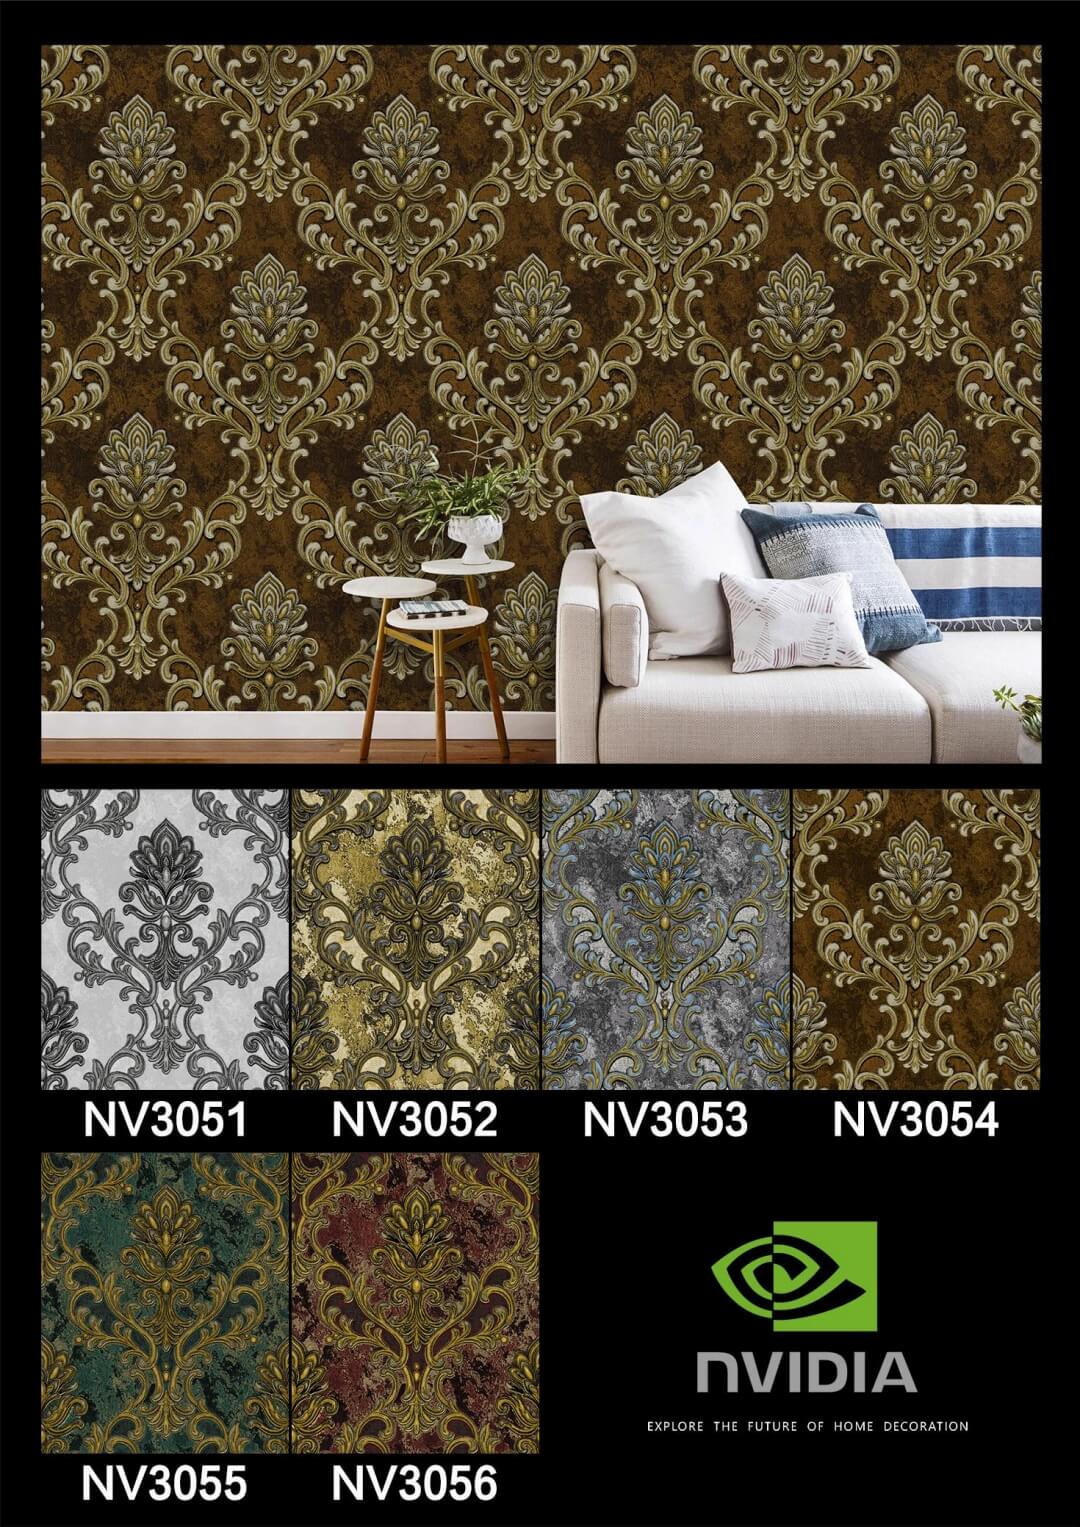 3D Waterproof Home Wallpaper at Lowest Price (9)